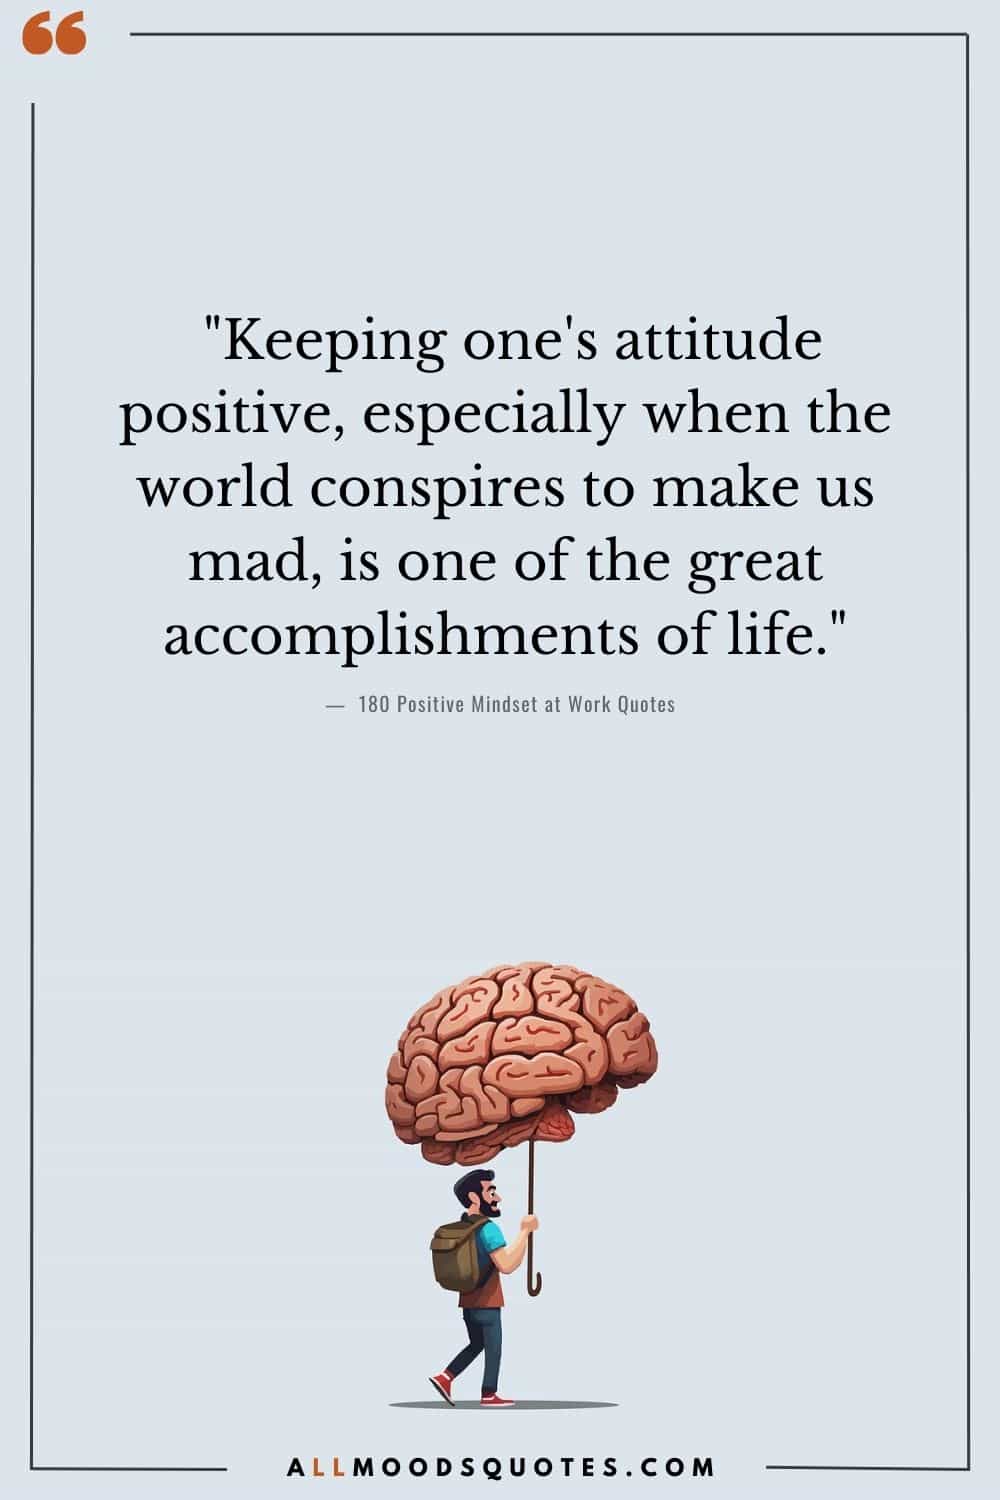 "Keeping one's attitude positive, especially when the world conspires to make us mad, is one of the great accomplishments of life." - Brendon Burchard